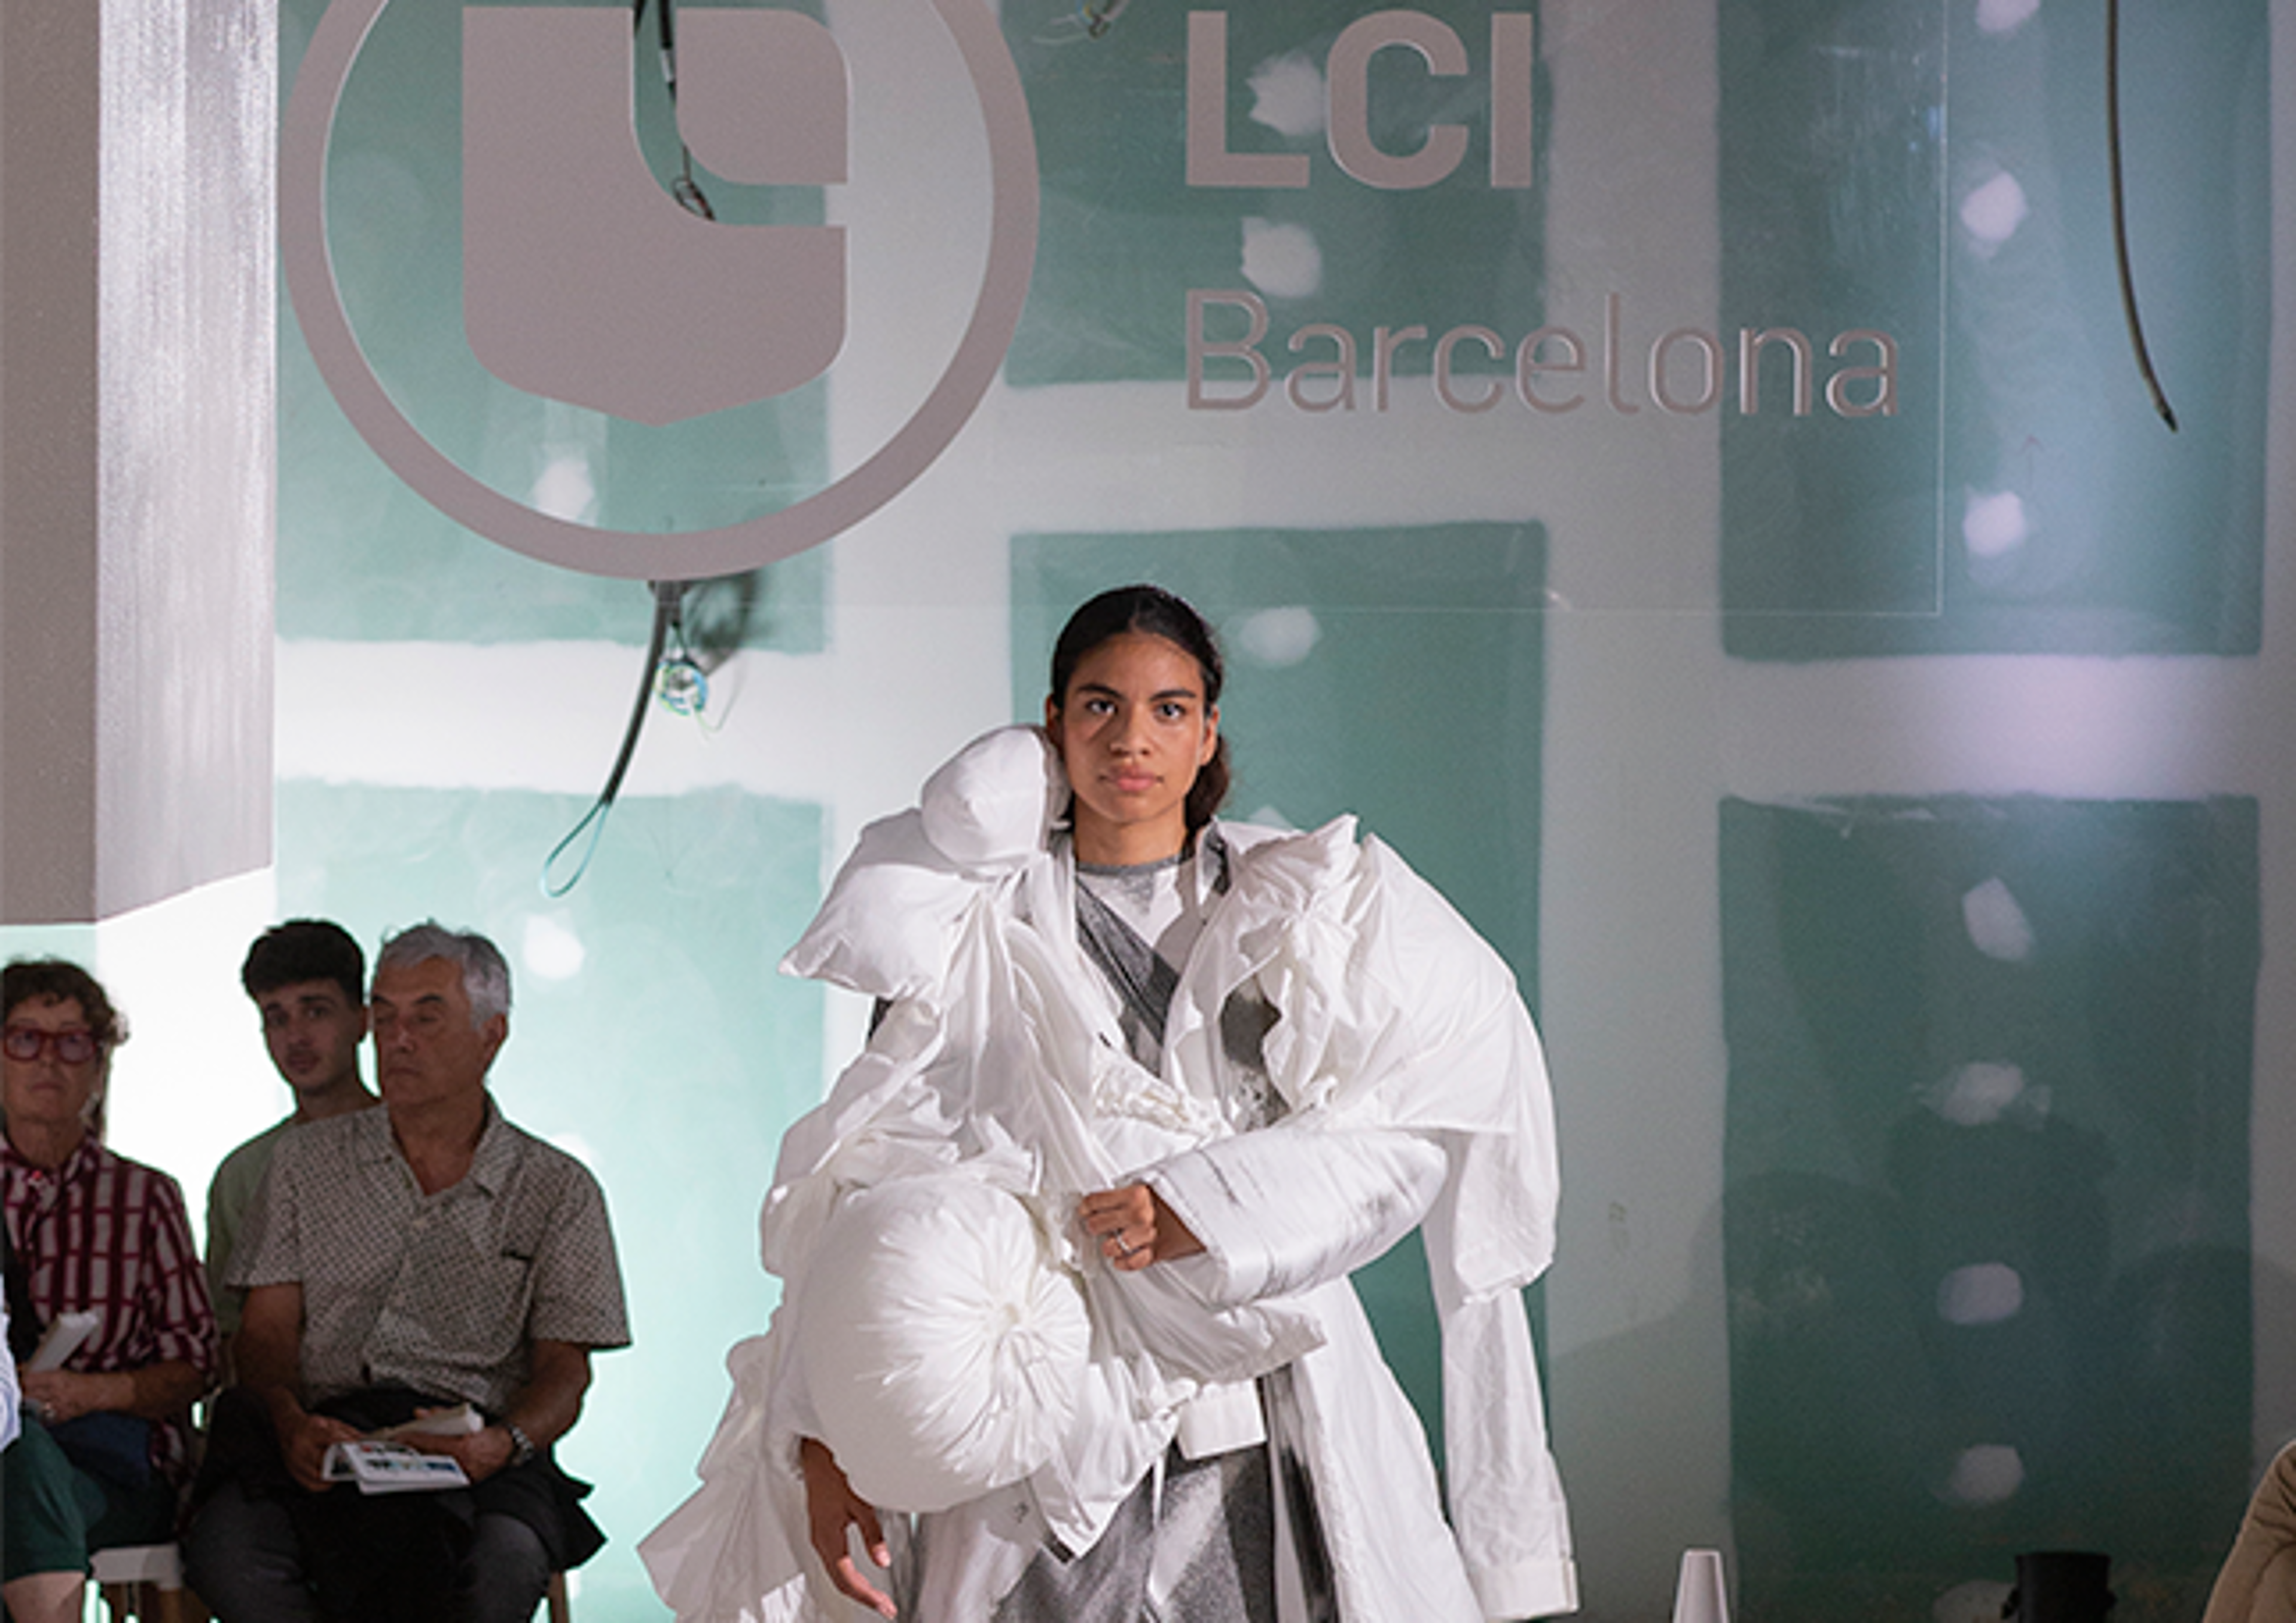 A model confidently showcases an avant-garde white outfit on the runway at LCI Barcelona's fashion event.